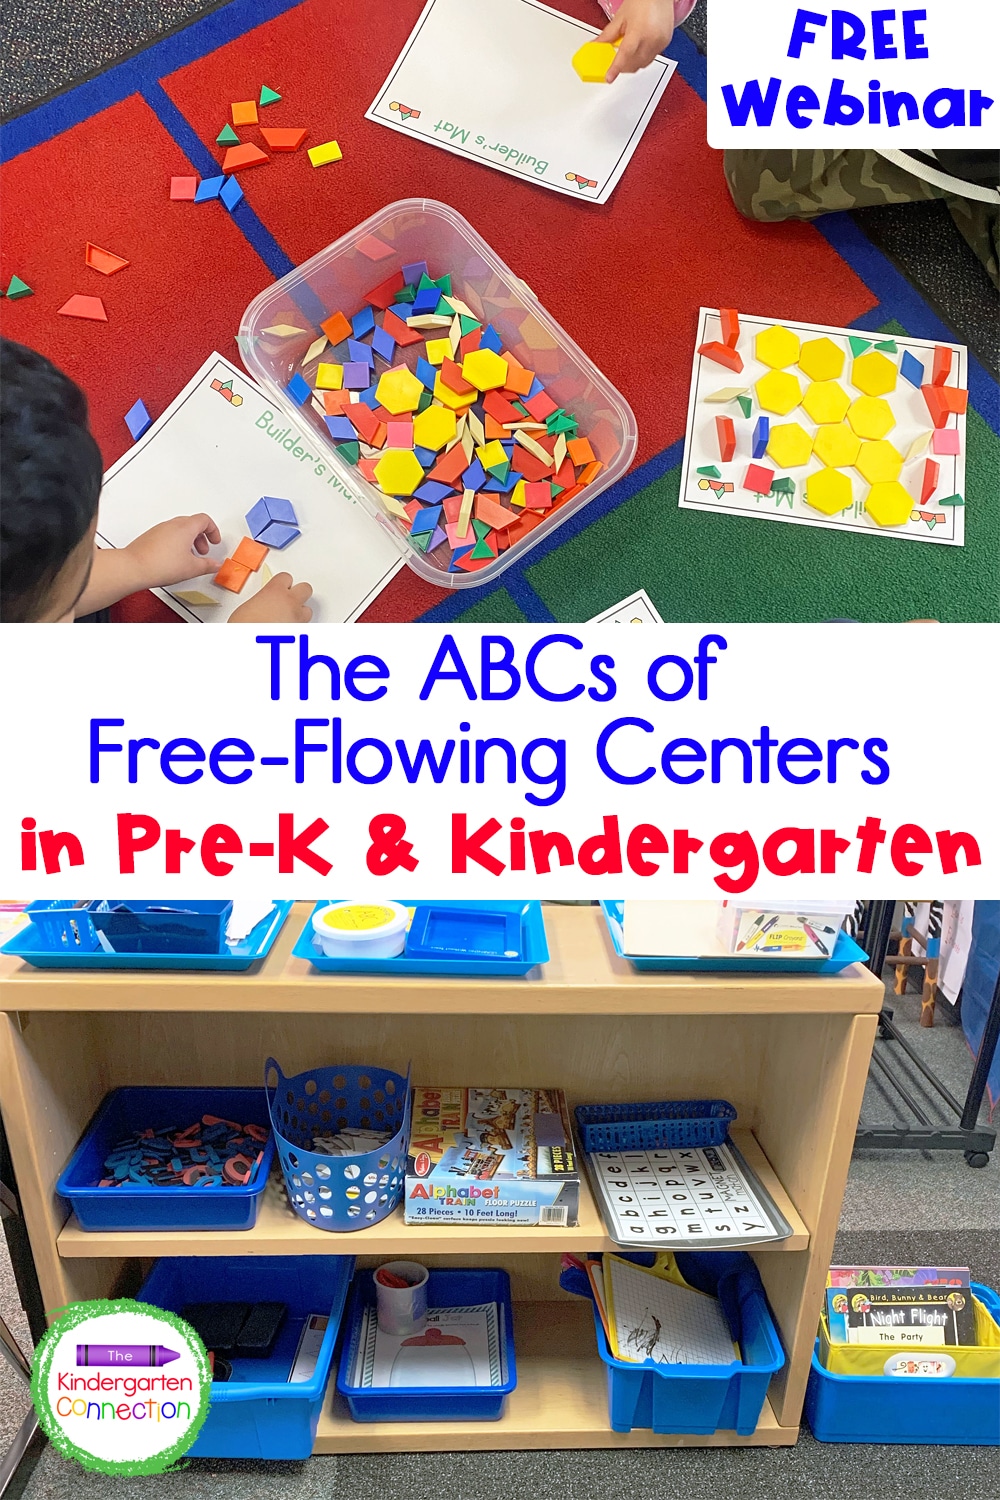 Increase Learning and Save Time with Independent Pre-K & Kindergarten Centers